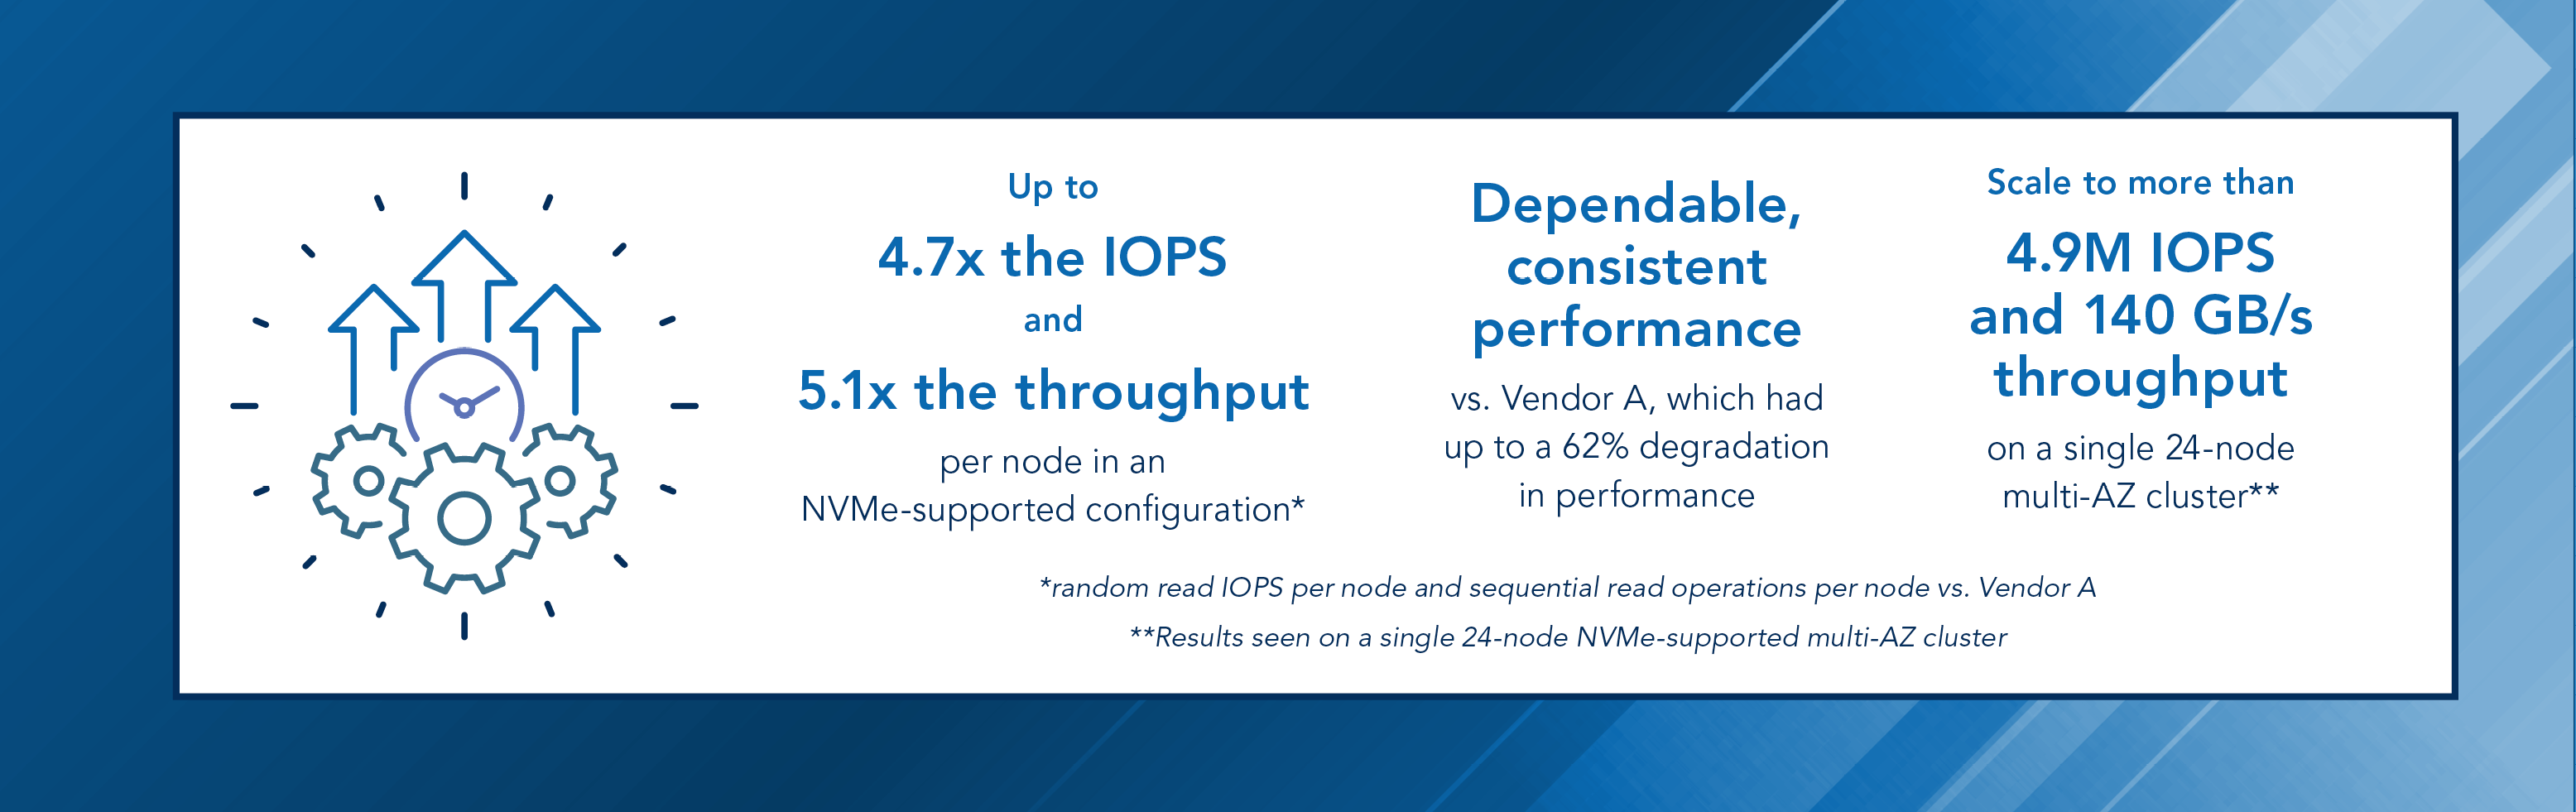 Up to 4.7 times the IOPS and 5.1 times the throughput per node in an NVMe-supported configuration (random read IOPS per node and sequential read operations per node vs. Vendor A). Dependable, consistent performance vs. Vendor A, which had up to a 62% degradation in performance. Scale to more than 4.9M IOPS and 140 GB/s throughput on a single 24-node multi-AZ cluster (results seen on a single 24-node NVMe-supported multi-AZ cluster). 